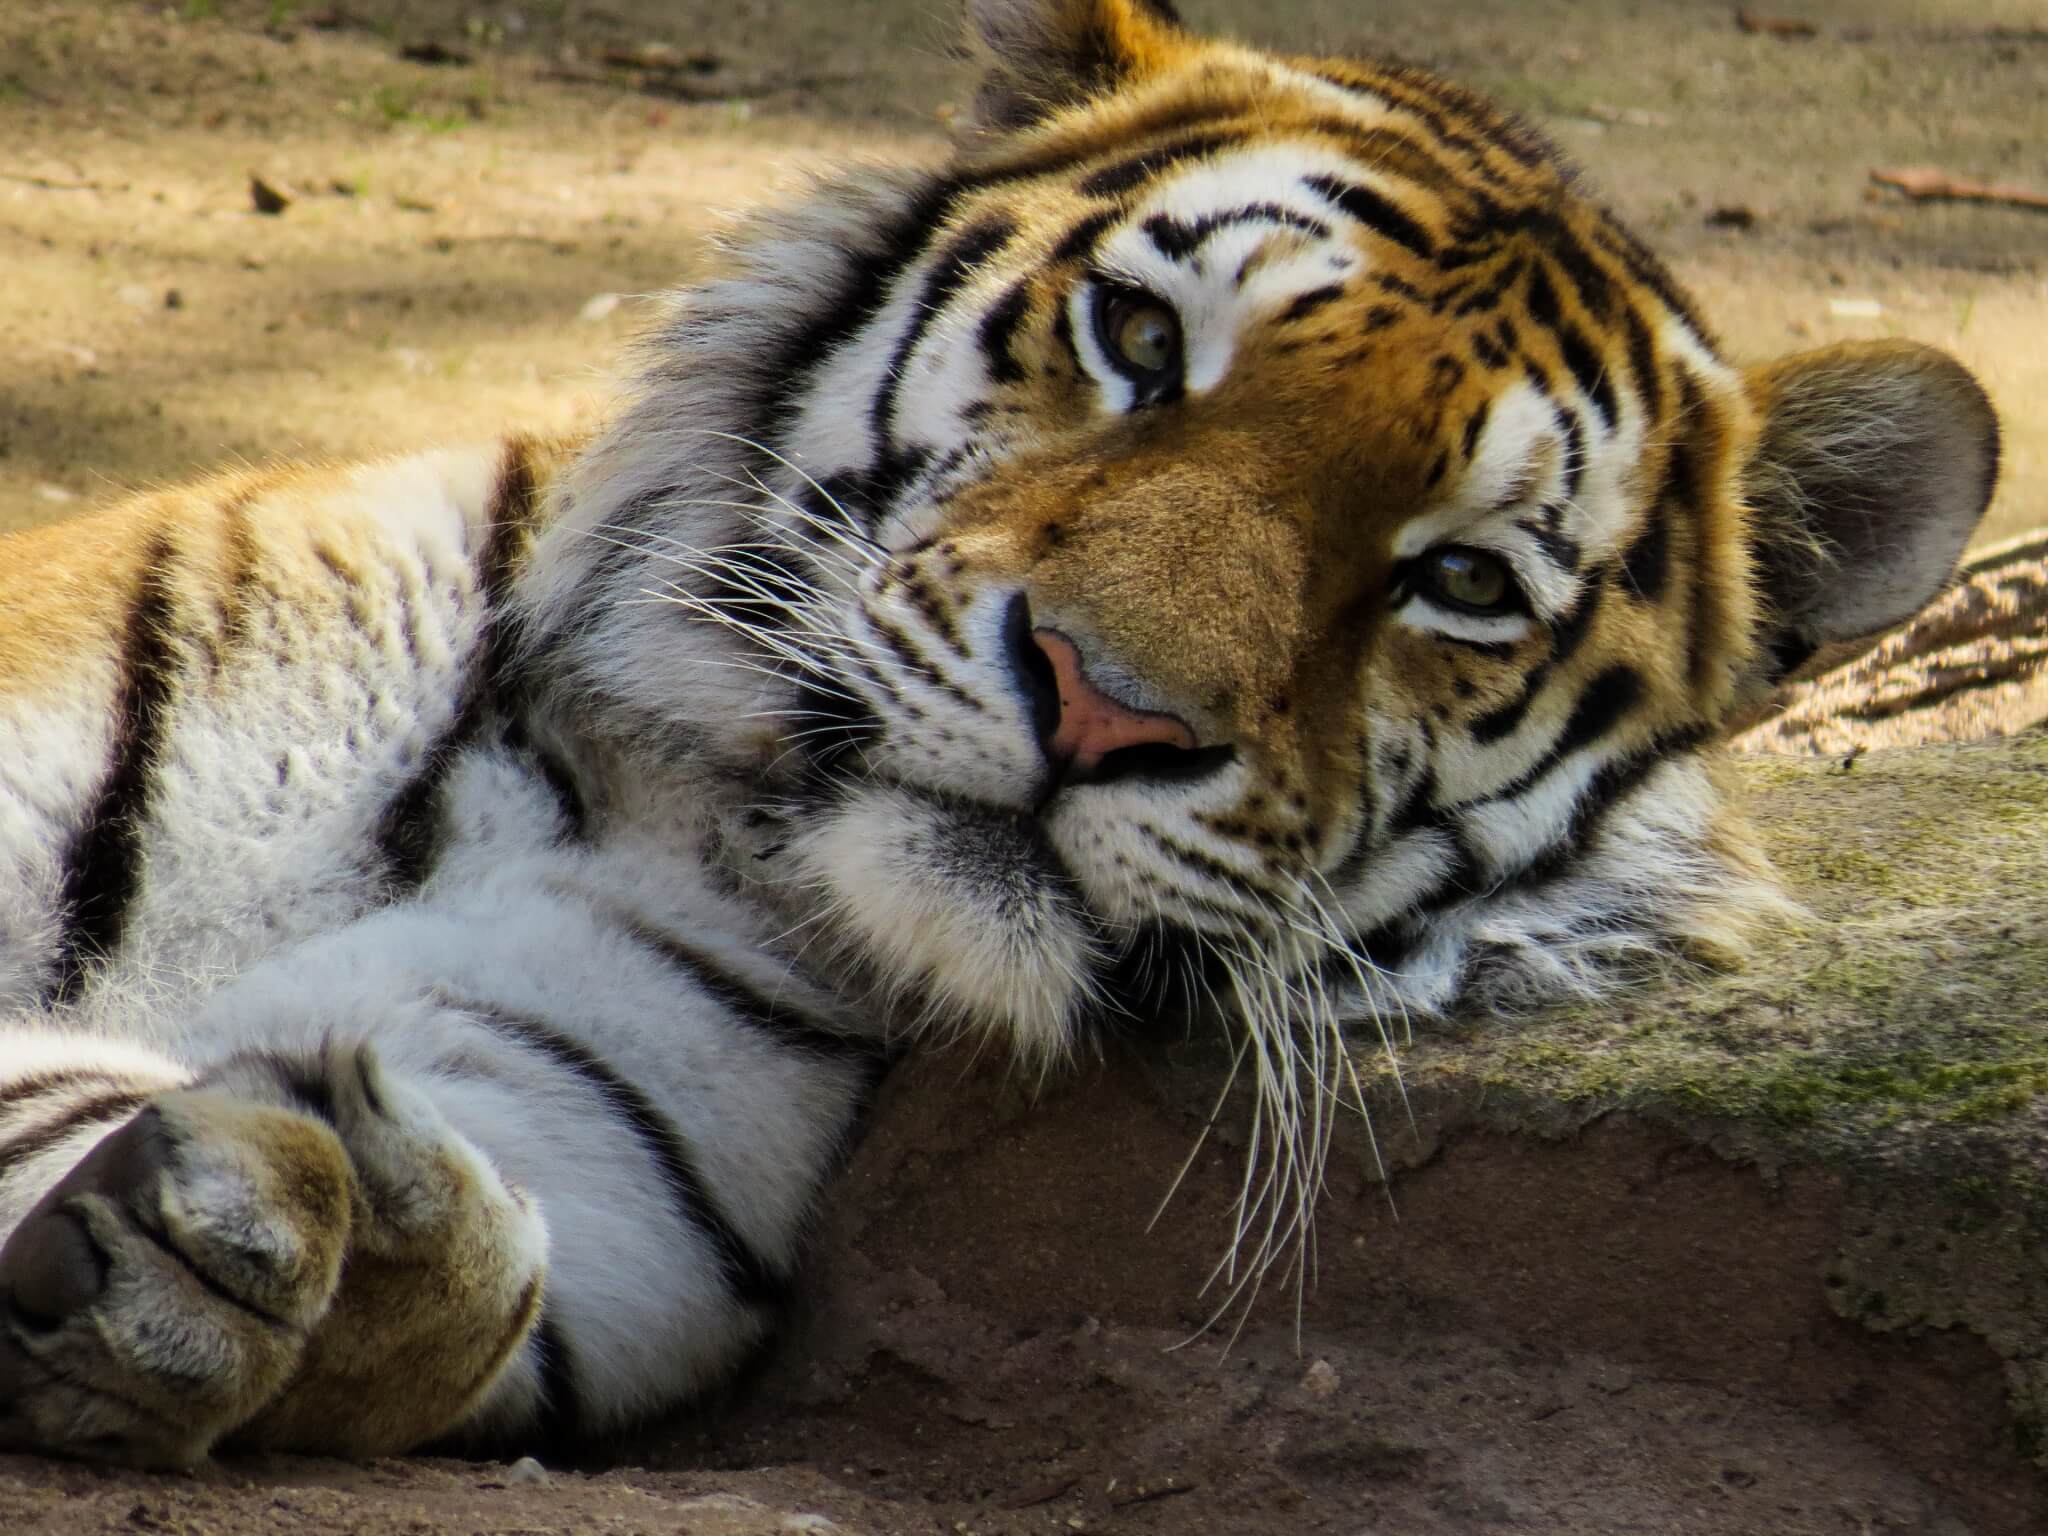 Appalling Animal Attractions: Tiger Temple in Thailand